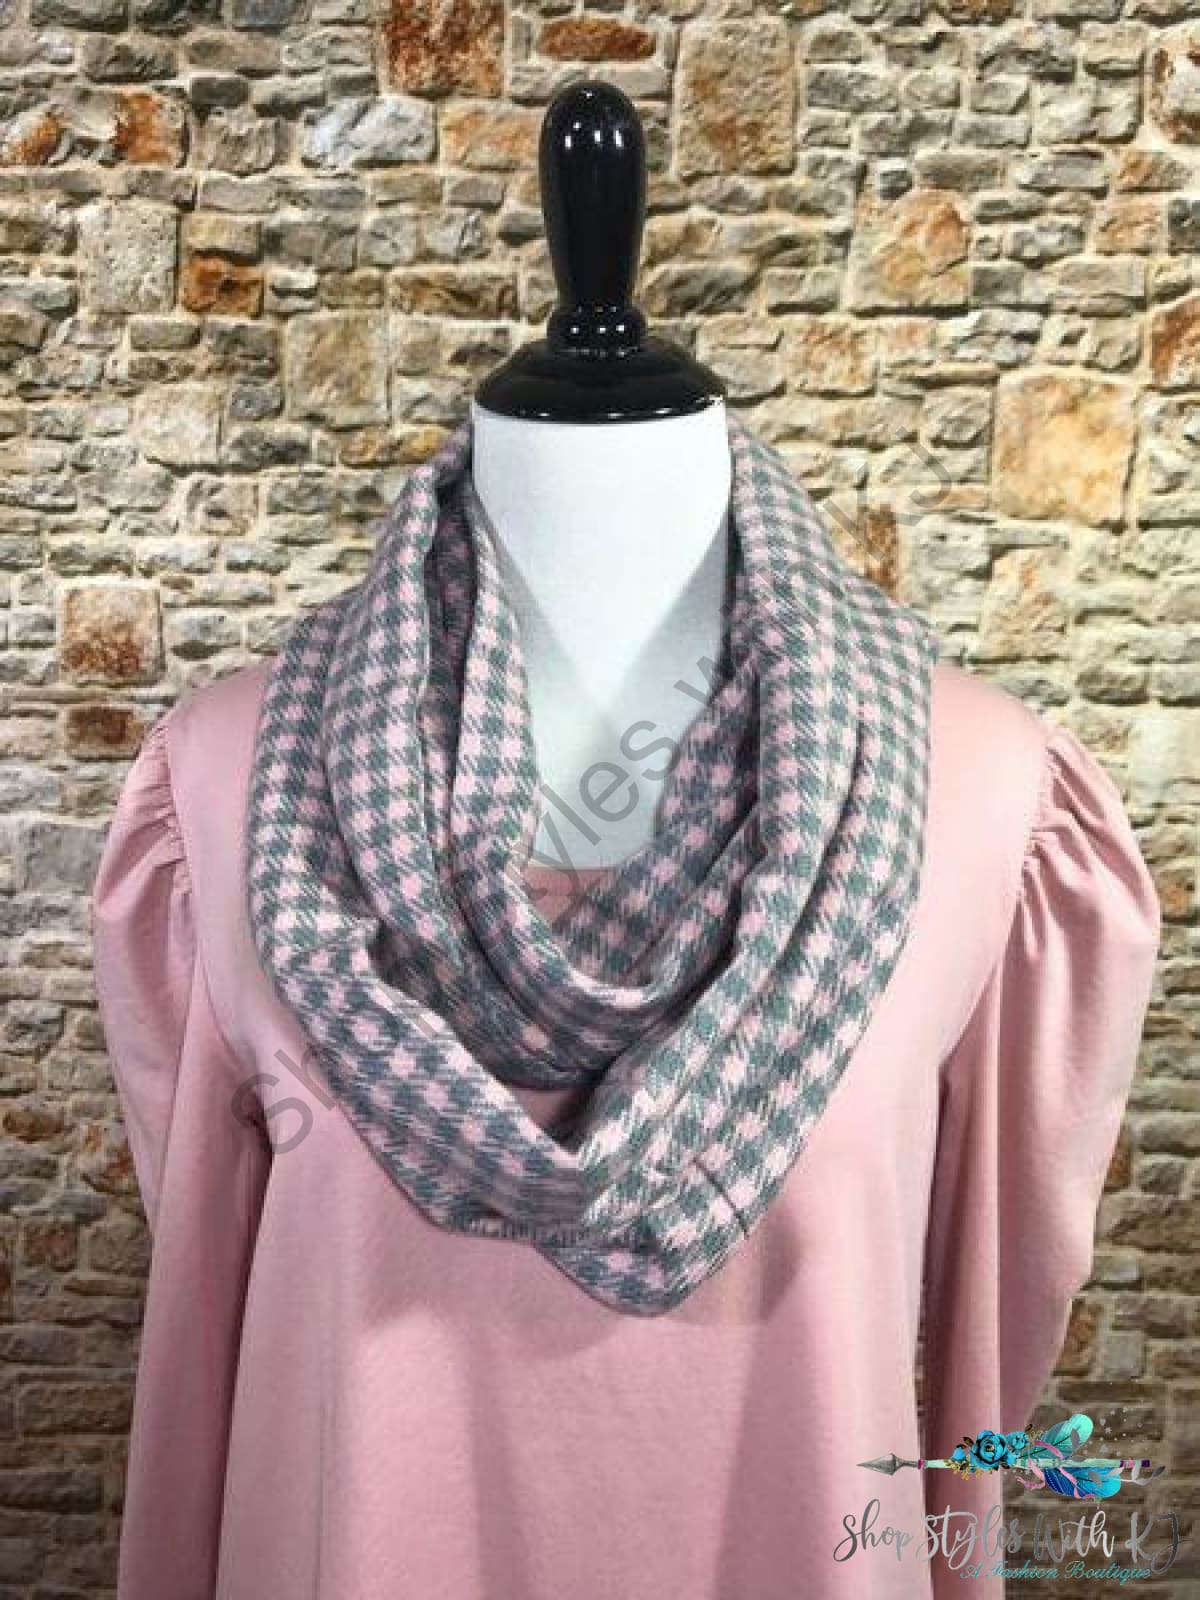 Checkered Infinity Scarf Scarf